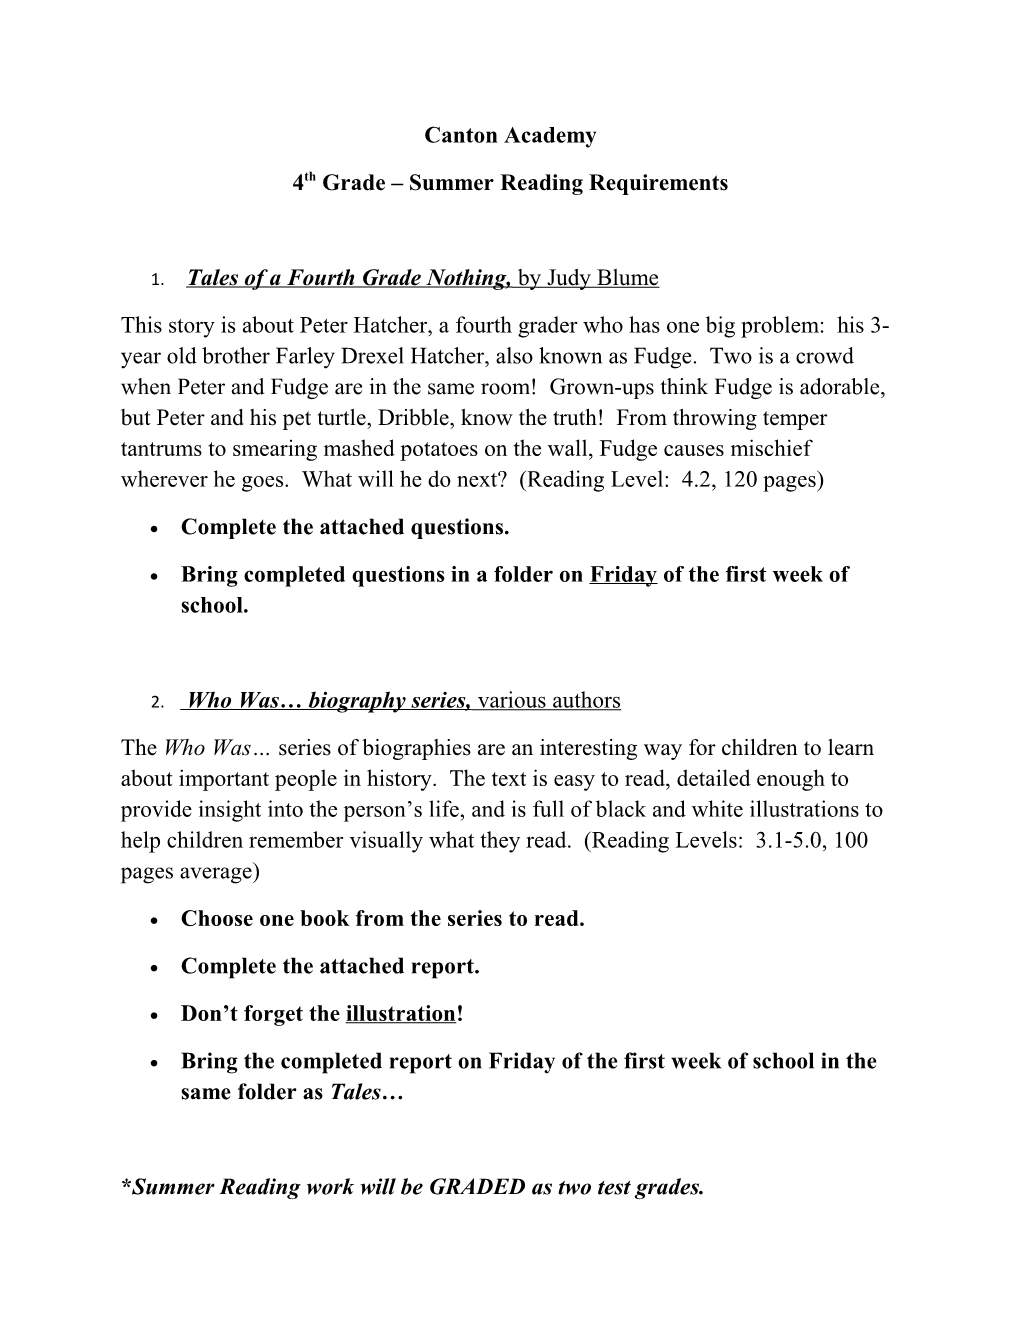 4Th Grade Summer Reading Requirements